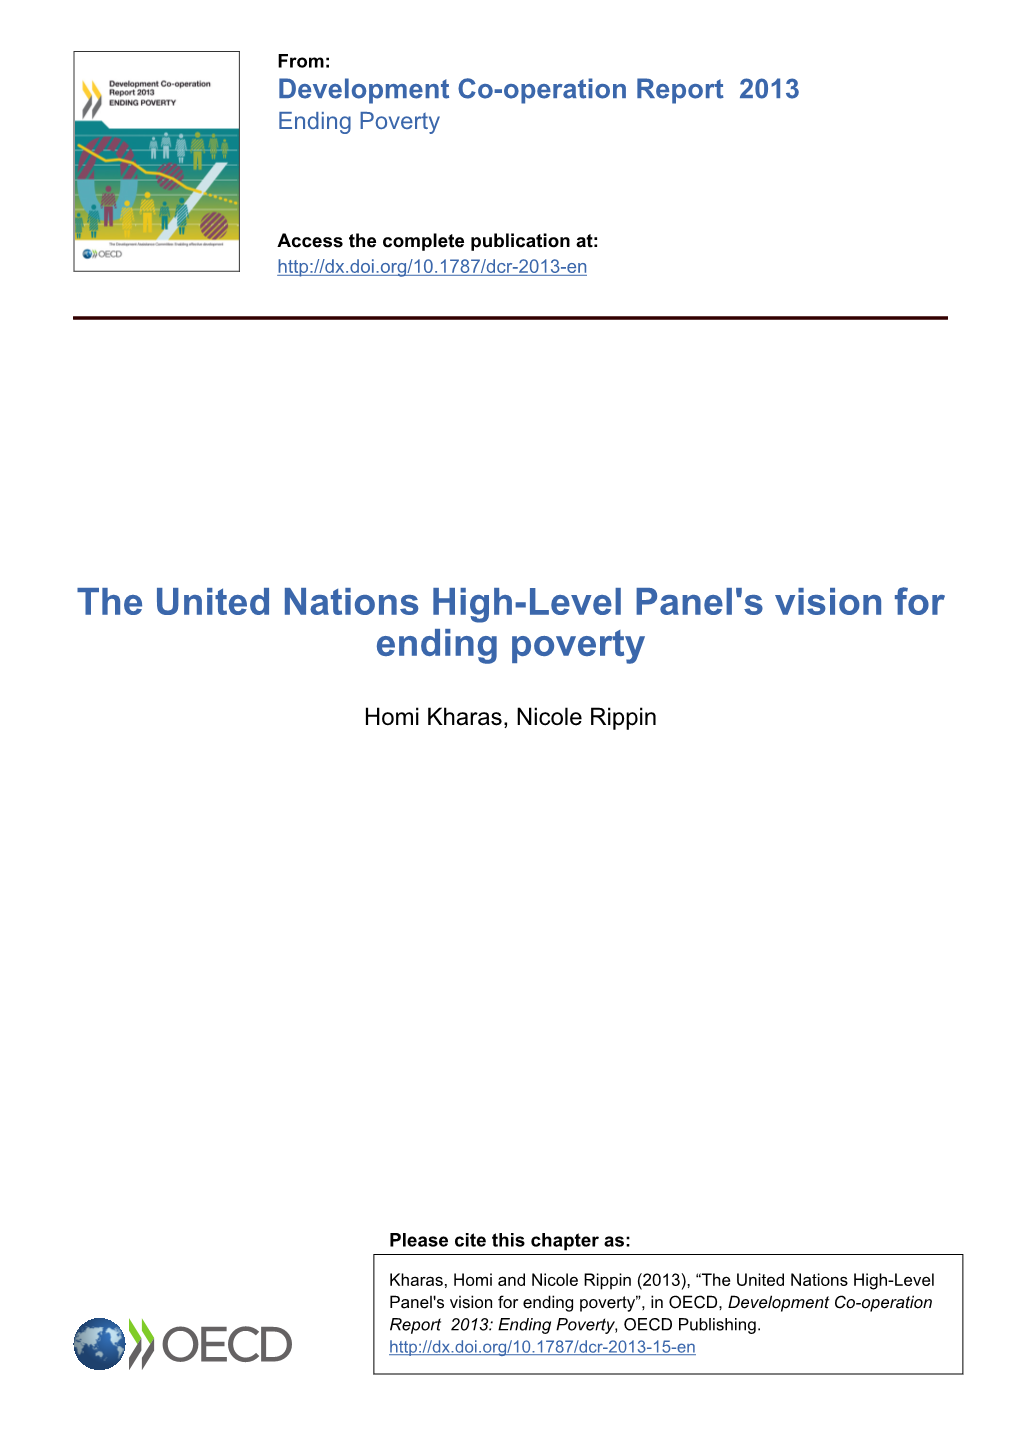 The United Nations High-Level Panel's Vision for Ending Poverty